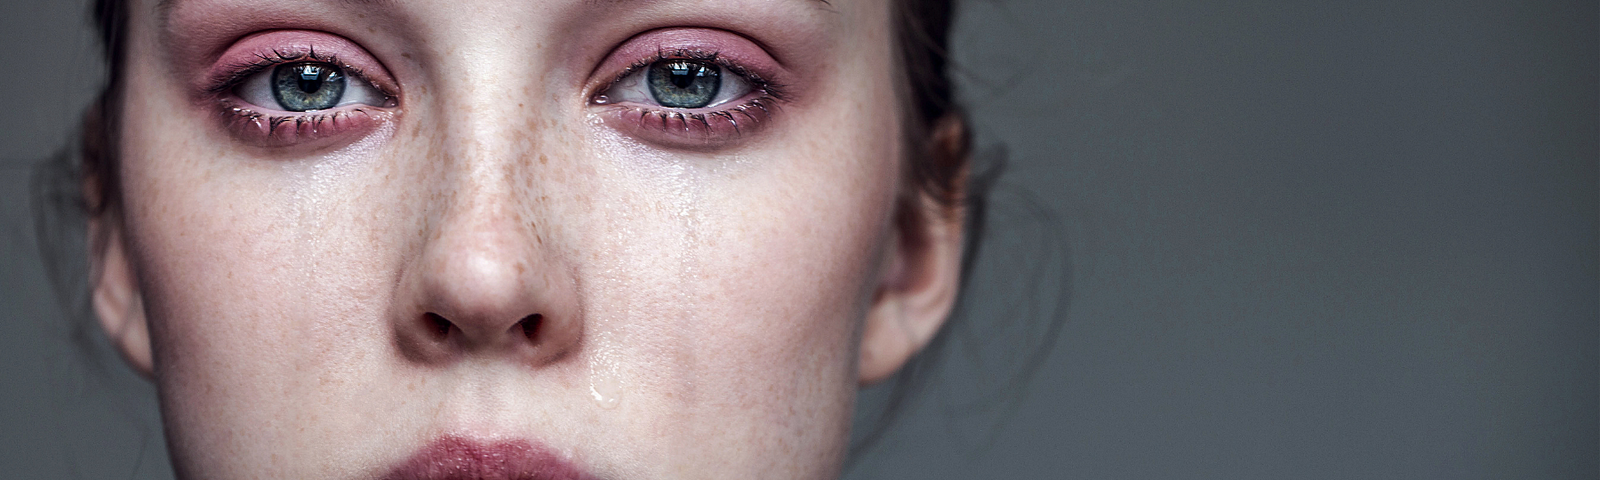 A close up of a young woman with light skin, freckles and green eyes. Her eyes are red and swollen and tears stream down her face.